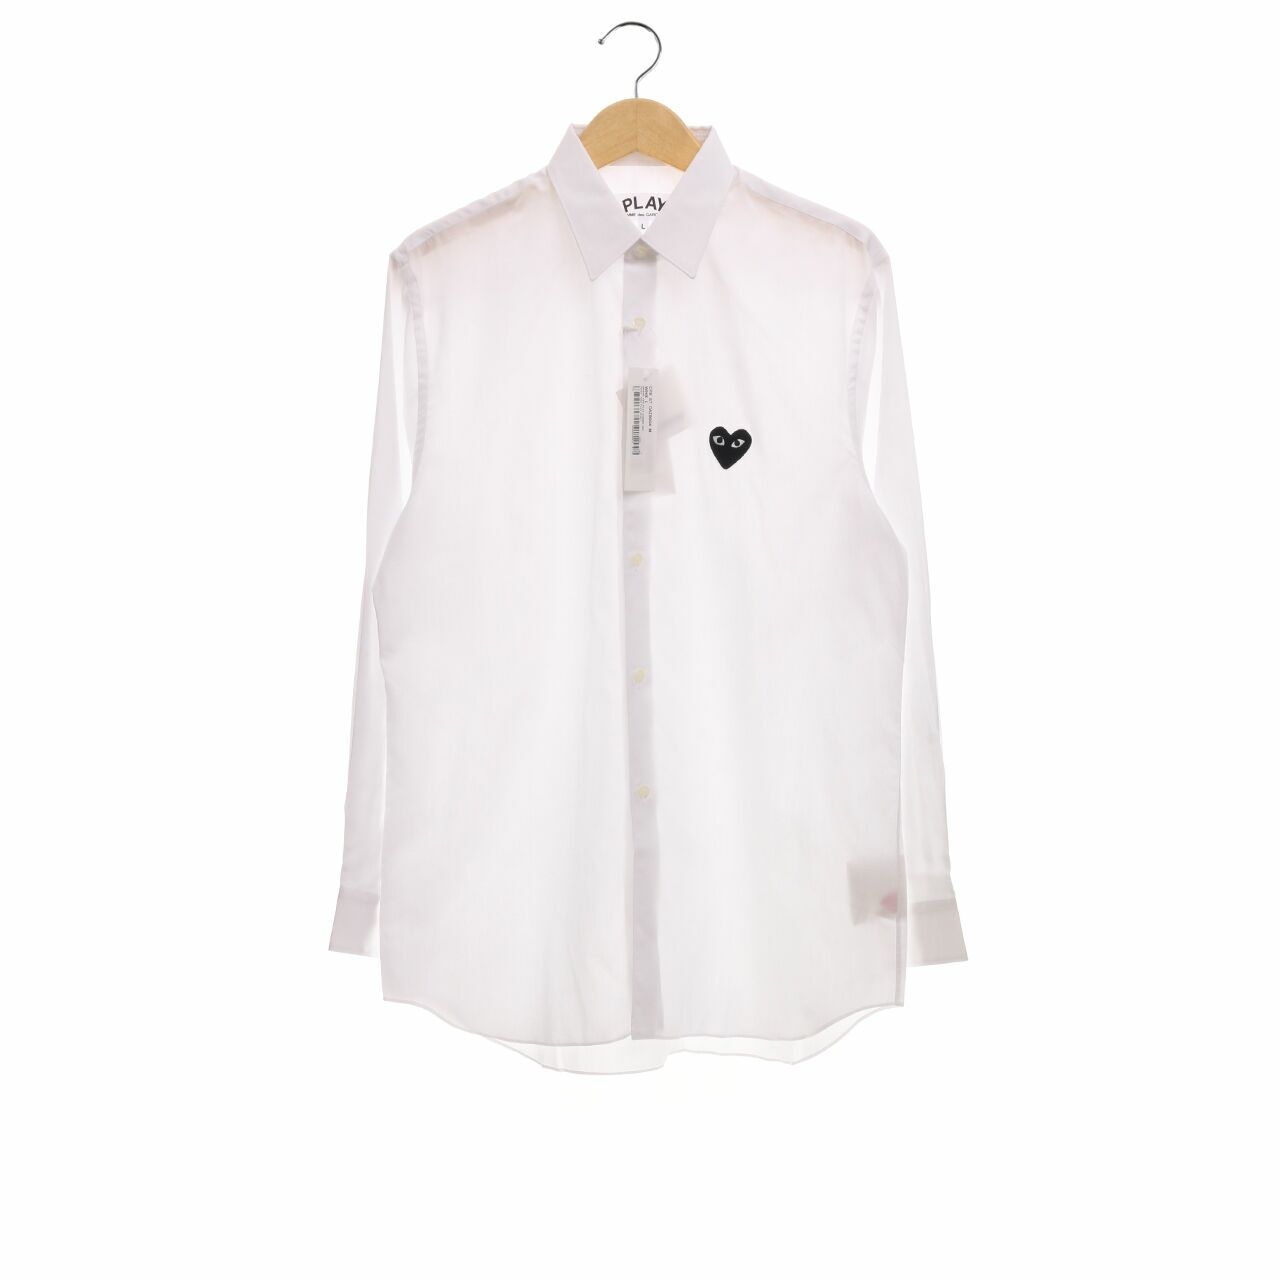 Play by Comme des Garcons White Long Sleeve Shirt